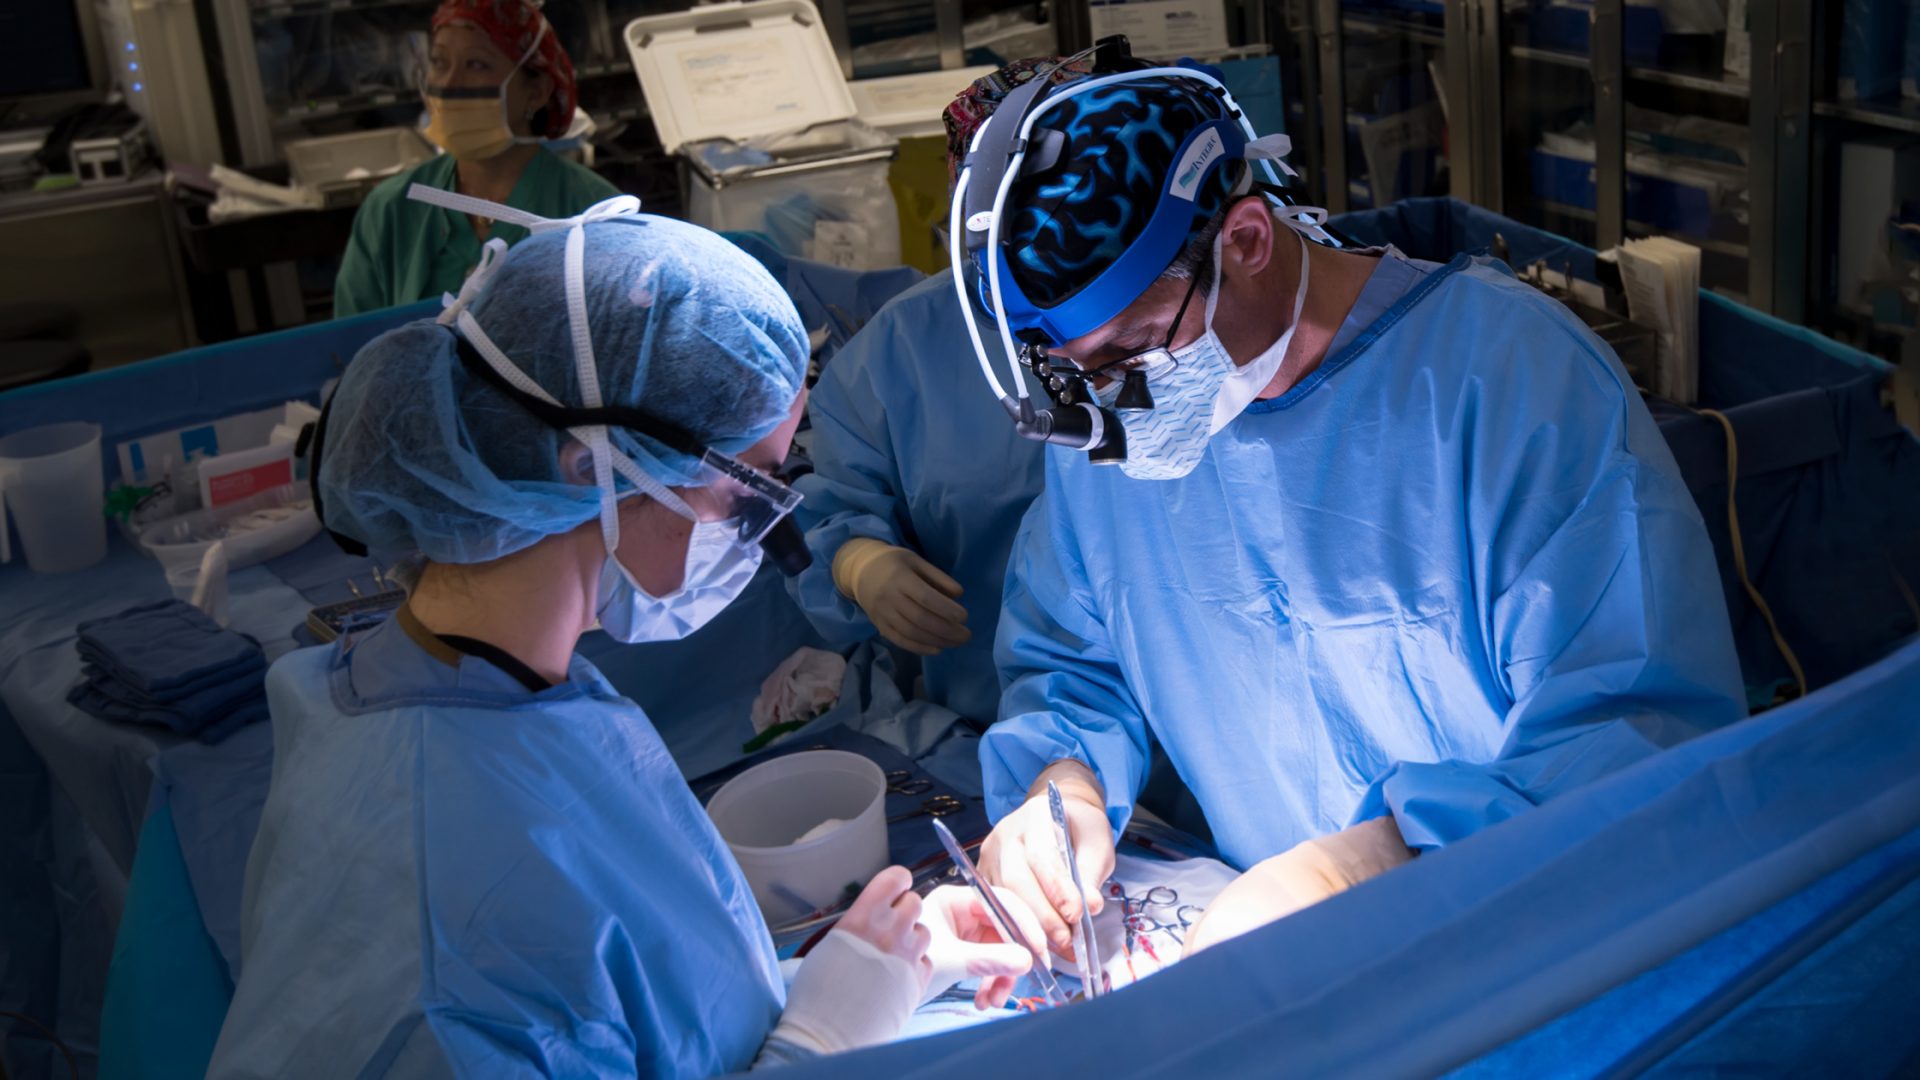 Dr. Ralph S. Mosca and Team Performing Surgery in Operating Room